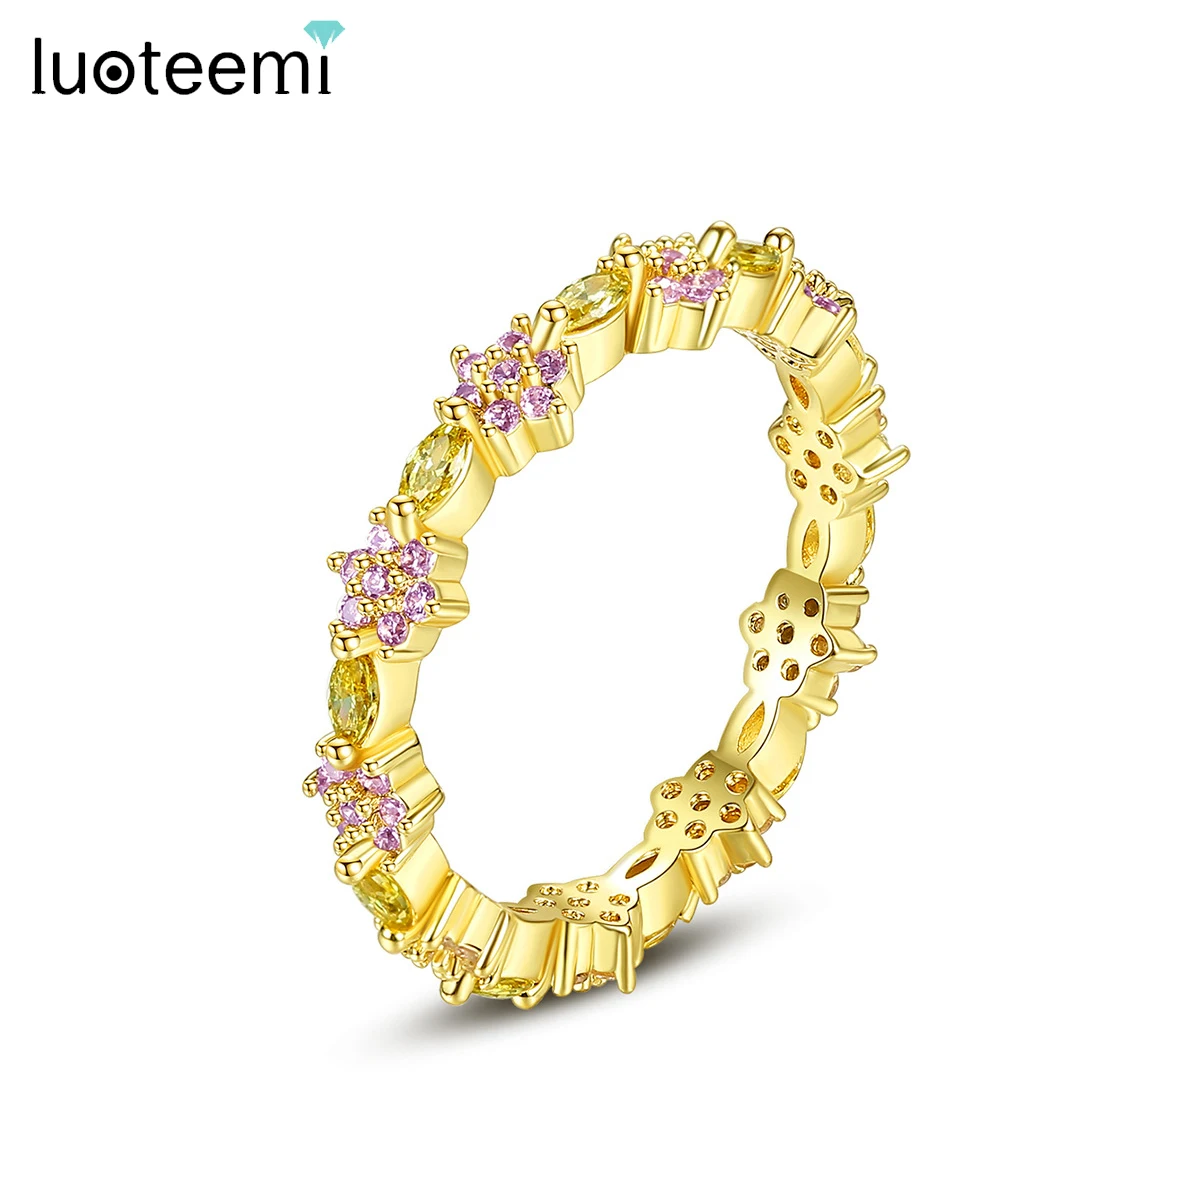 

LUOTEEMI Flower Couples Ring for Women Pink Cubic Zirconia Adjustable Fidget Rings Anel Masculino Friends Gifts Wholesale Items